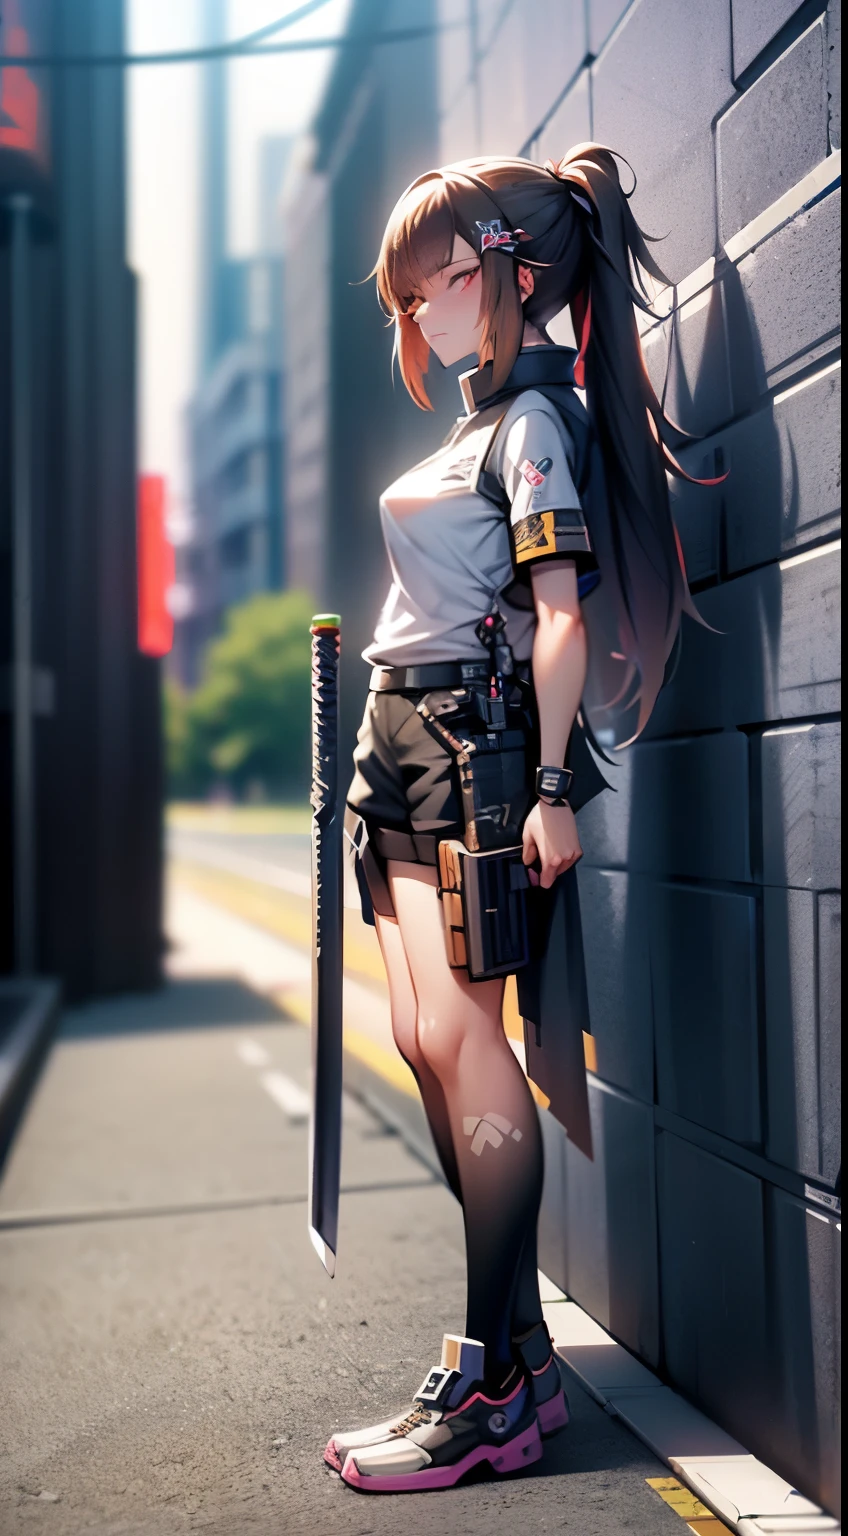 personnage d&#39;anime with sword standing in front of graffiti covered wall, from chevaliers, style animé, Style animé, style de première ligne des filles, kanliu666, Style animéd, style animé, guweiz, chevaliers, Style animé 4 k, fille animée cyberpunk, des filles de première ligne, porter des vêtements techniques japonais, style artistique animé, personnage d&#39;anime